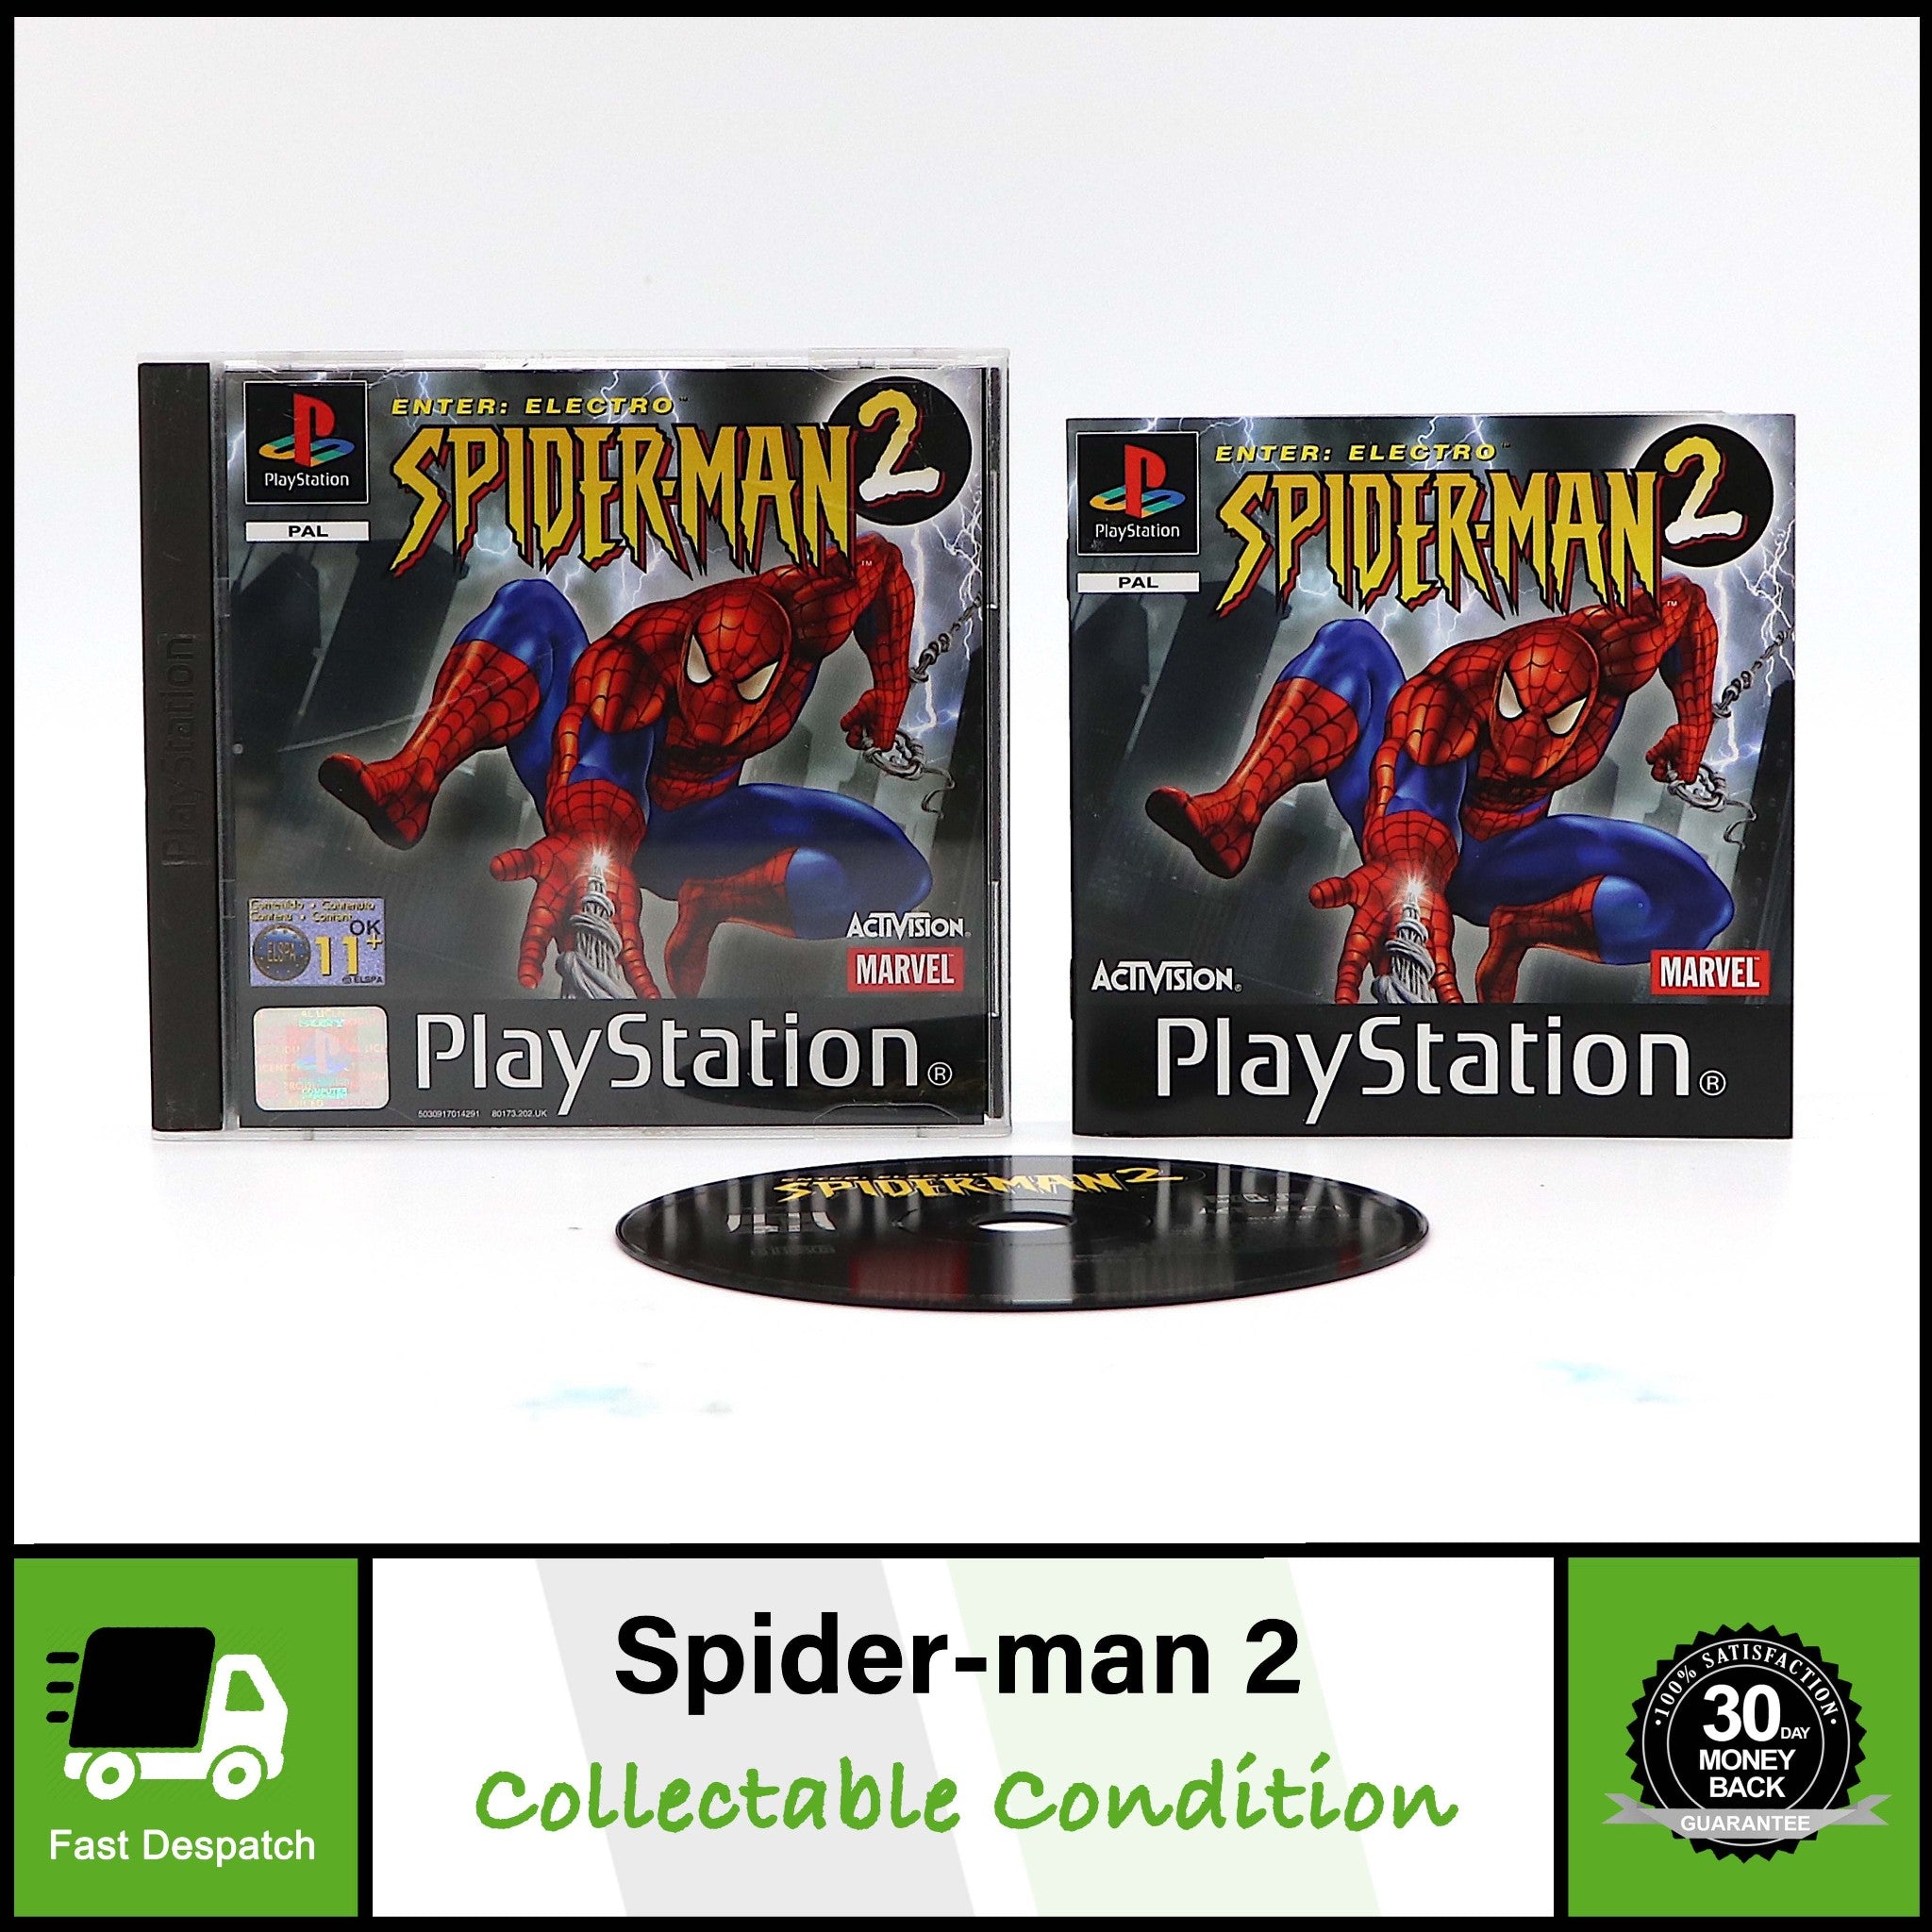 Spiderman 2 Enter Electro | Playstation PSONE PS1 Game | Collectable Condition